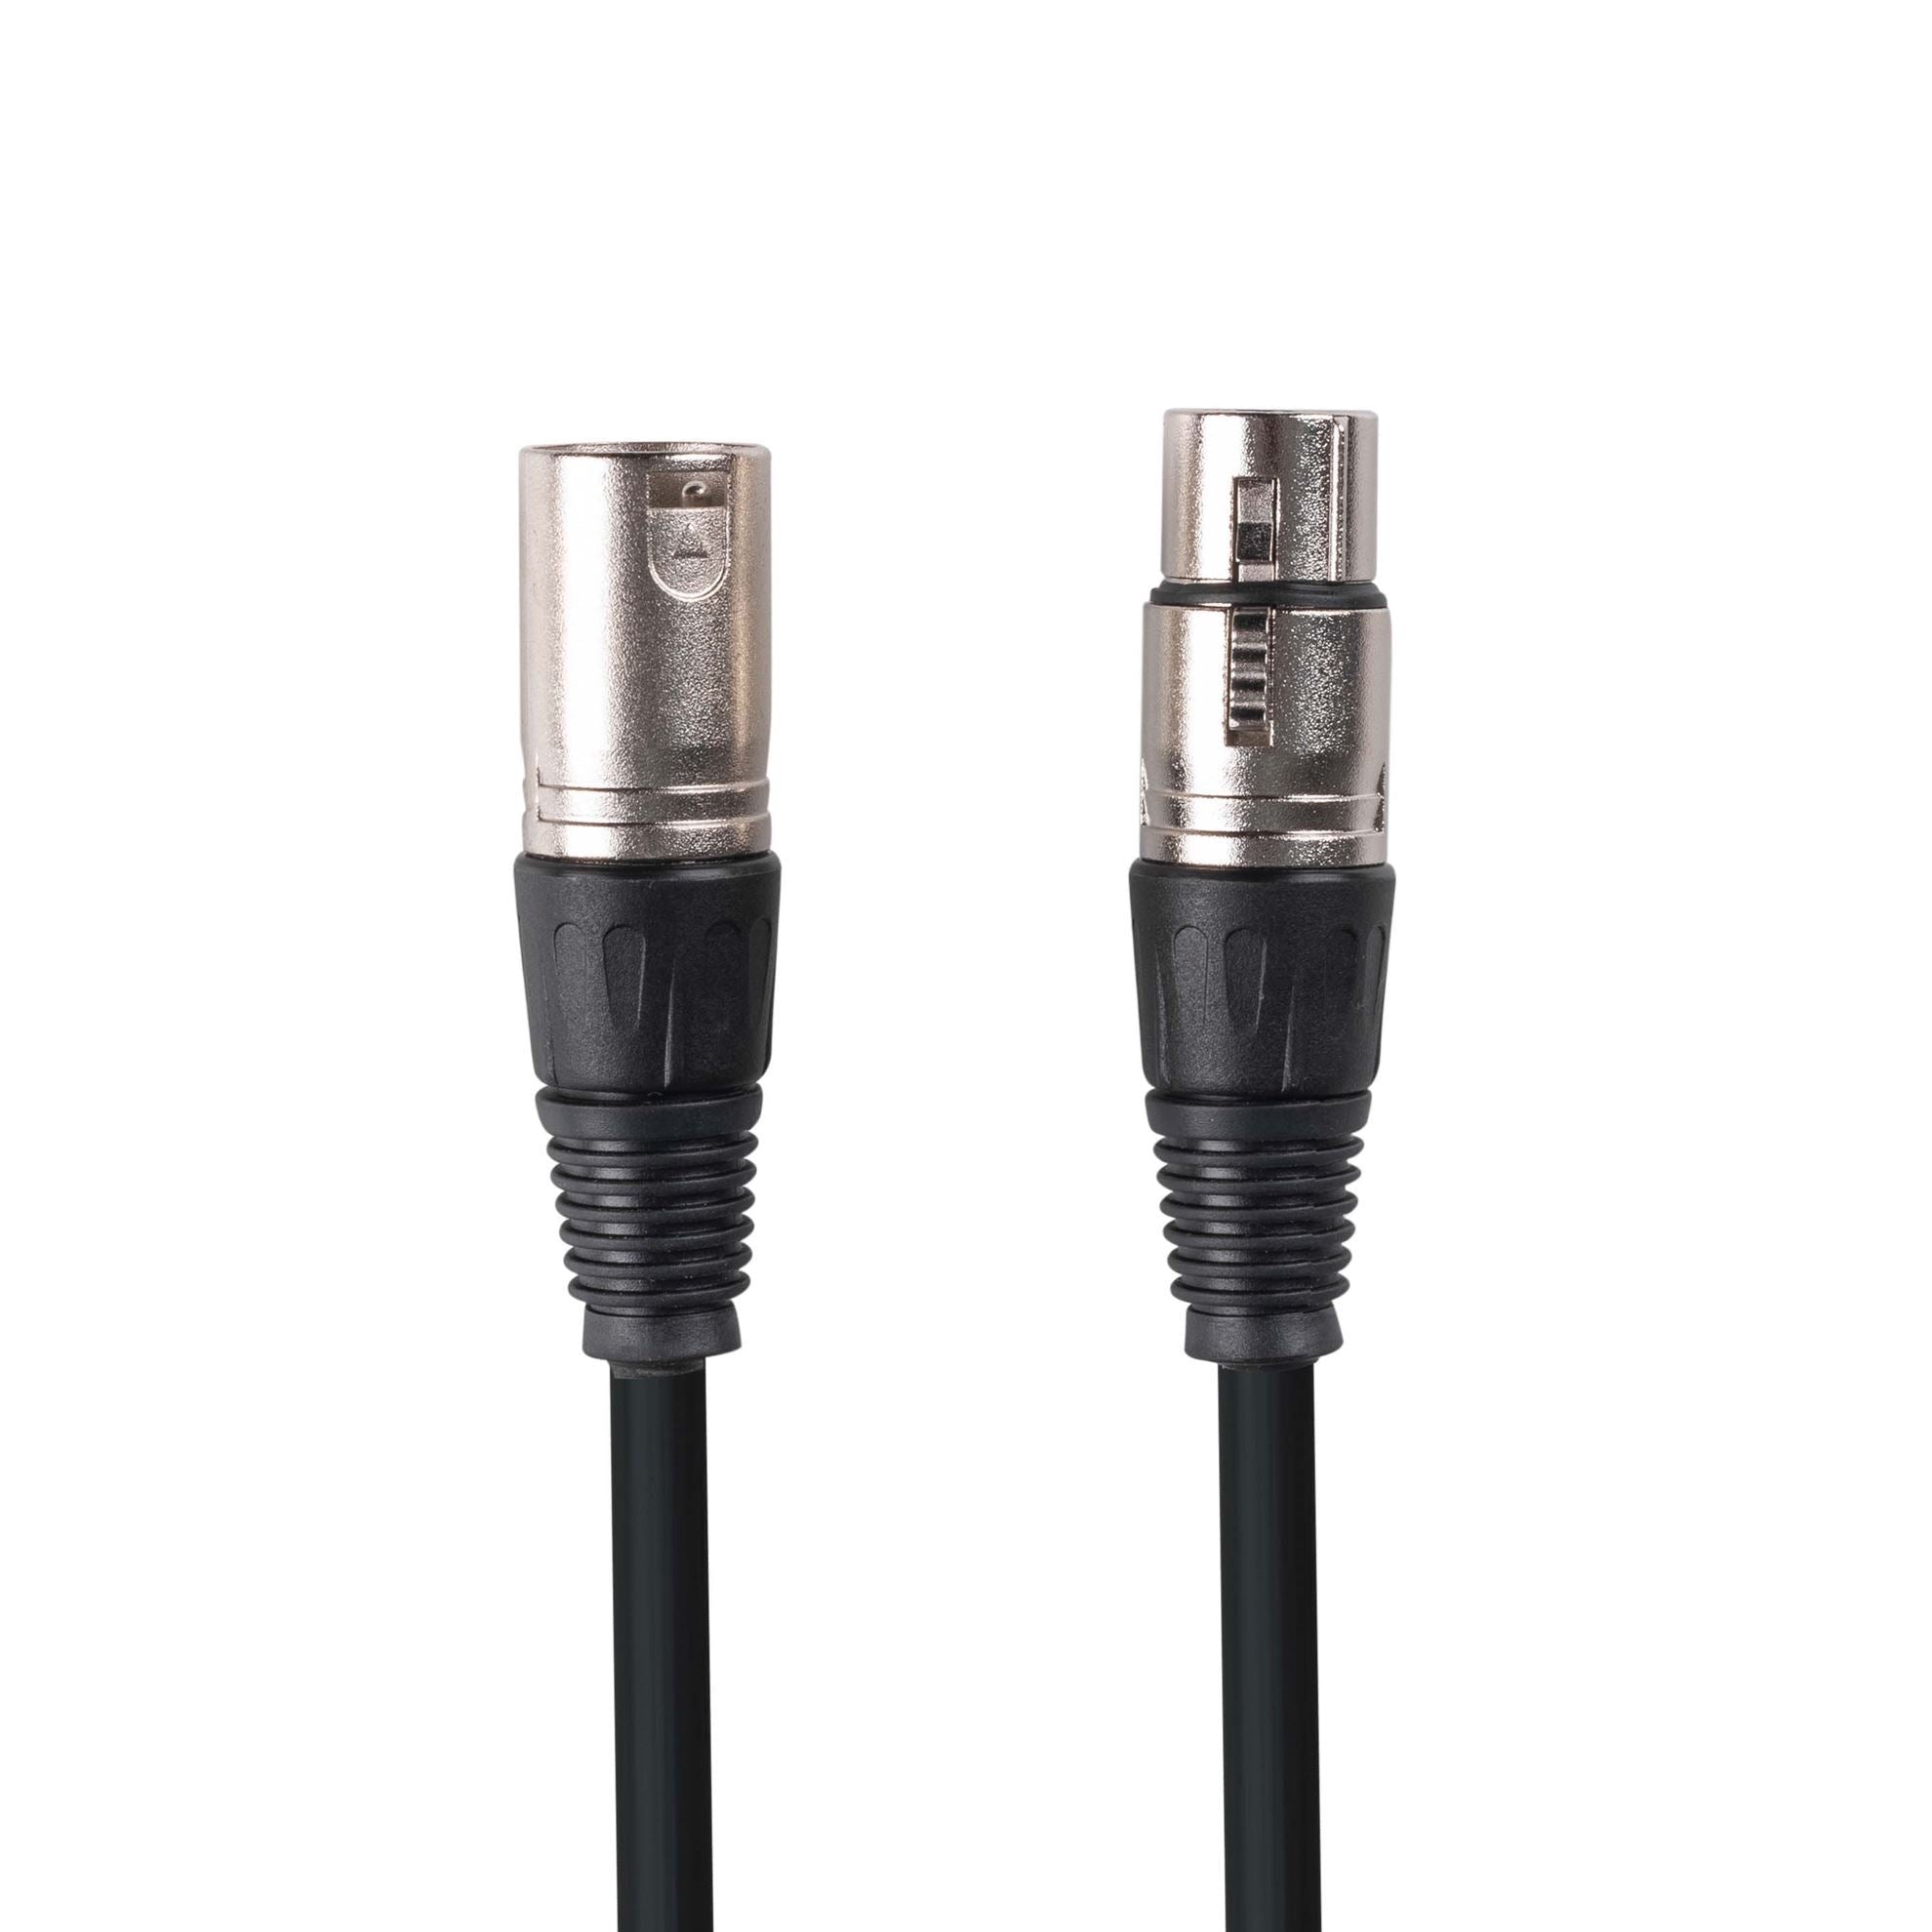 DYNAMIX_15m_XLR_3-Pin_Male_to_Female_Balanced_Audio_Cable 1250